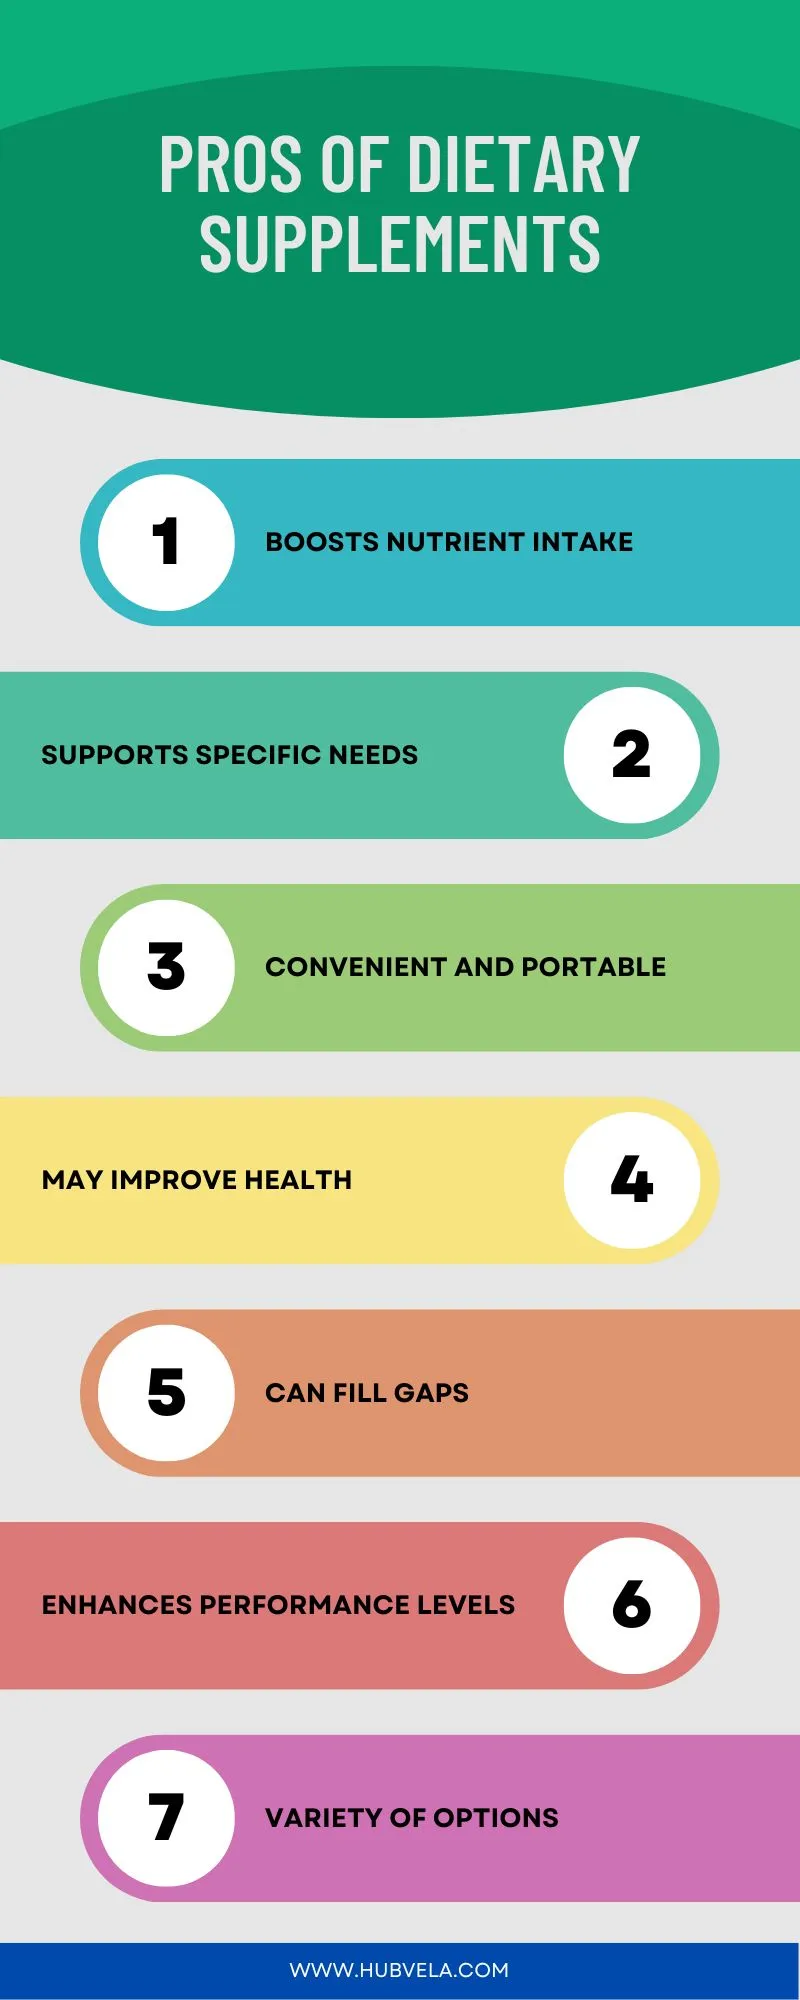 Pros of Dietary Supplements Infographic